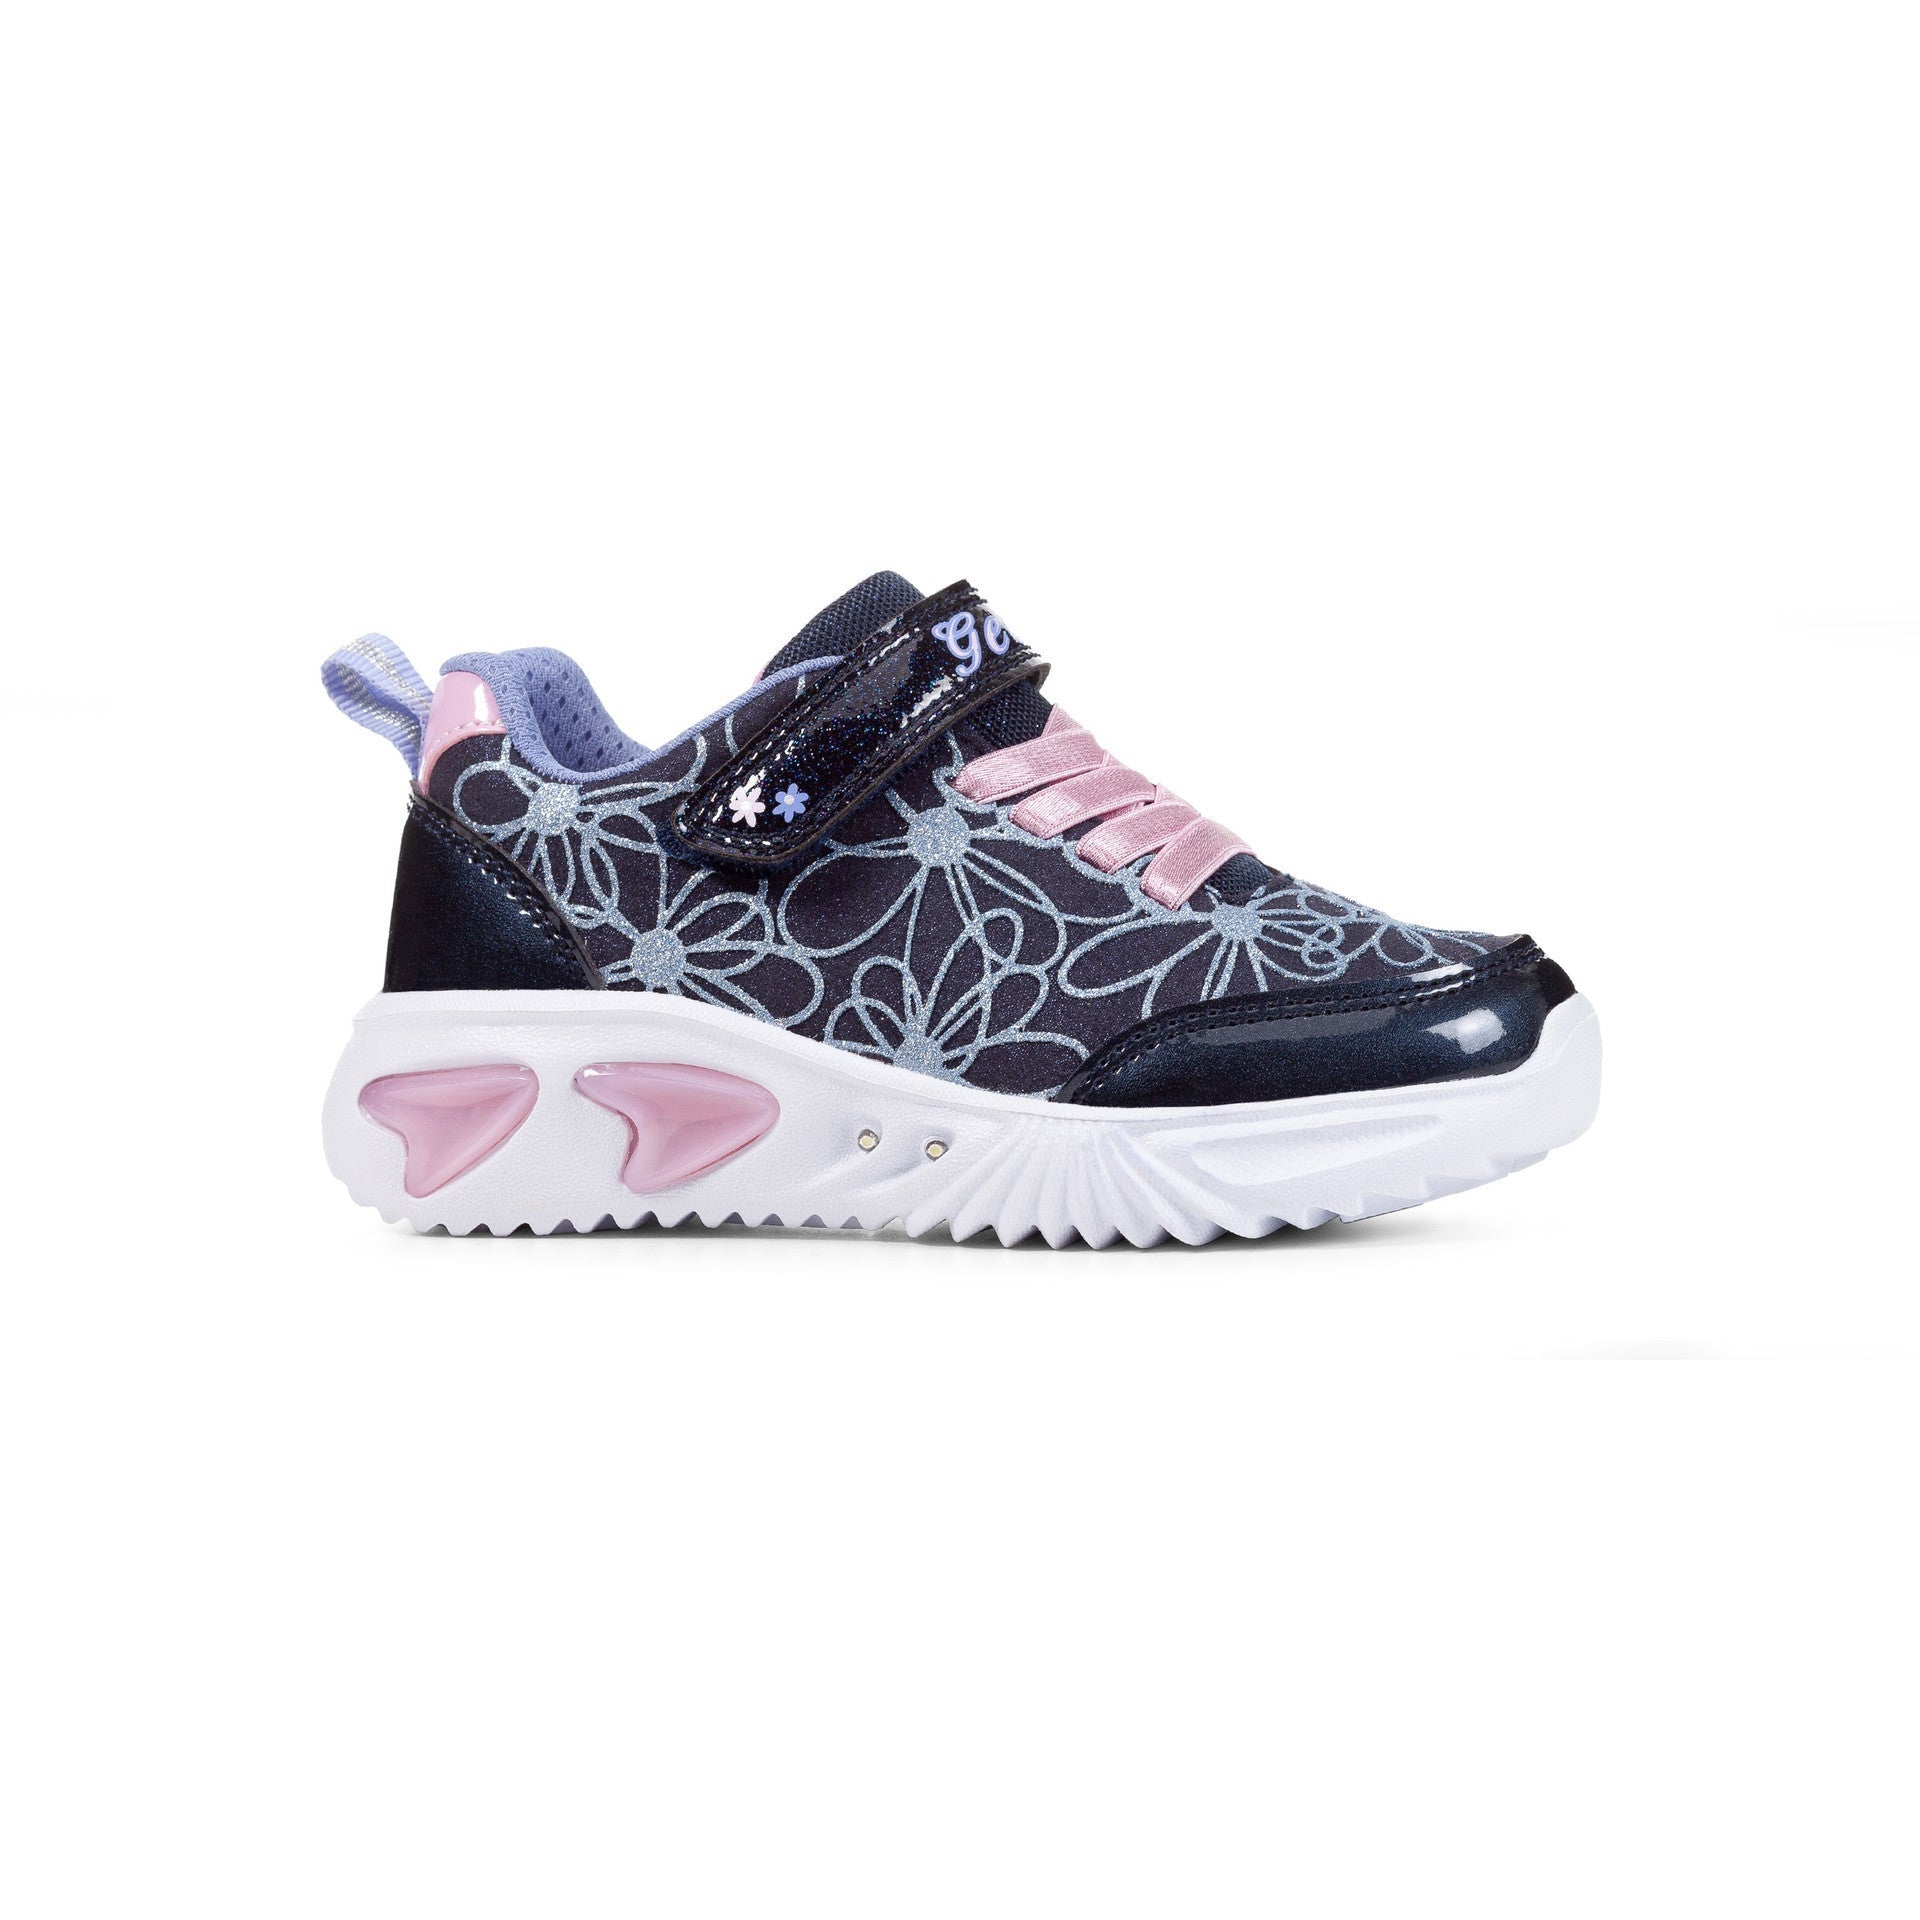 Geox Assister (J26E9A) - Girls Velcro Trainer in Navy/Pink. Geox Shoes | Childrens Shoe Fitting | Wisemans | Bantry | West Cork | Ireland